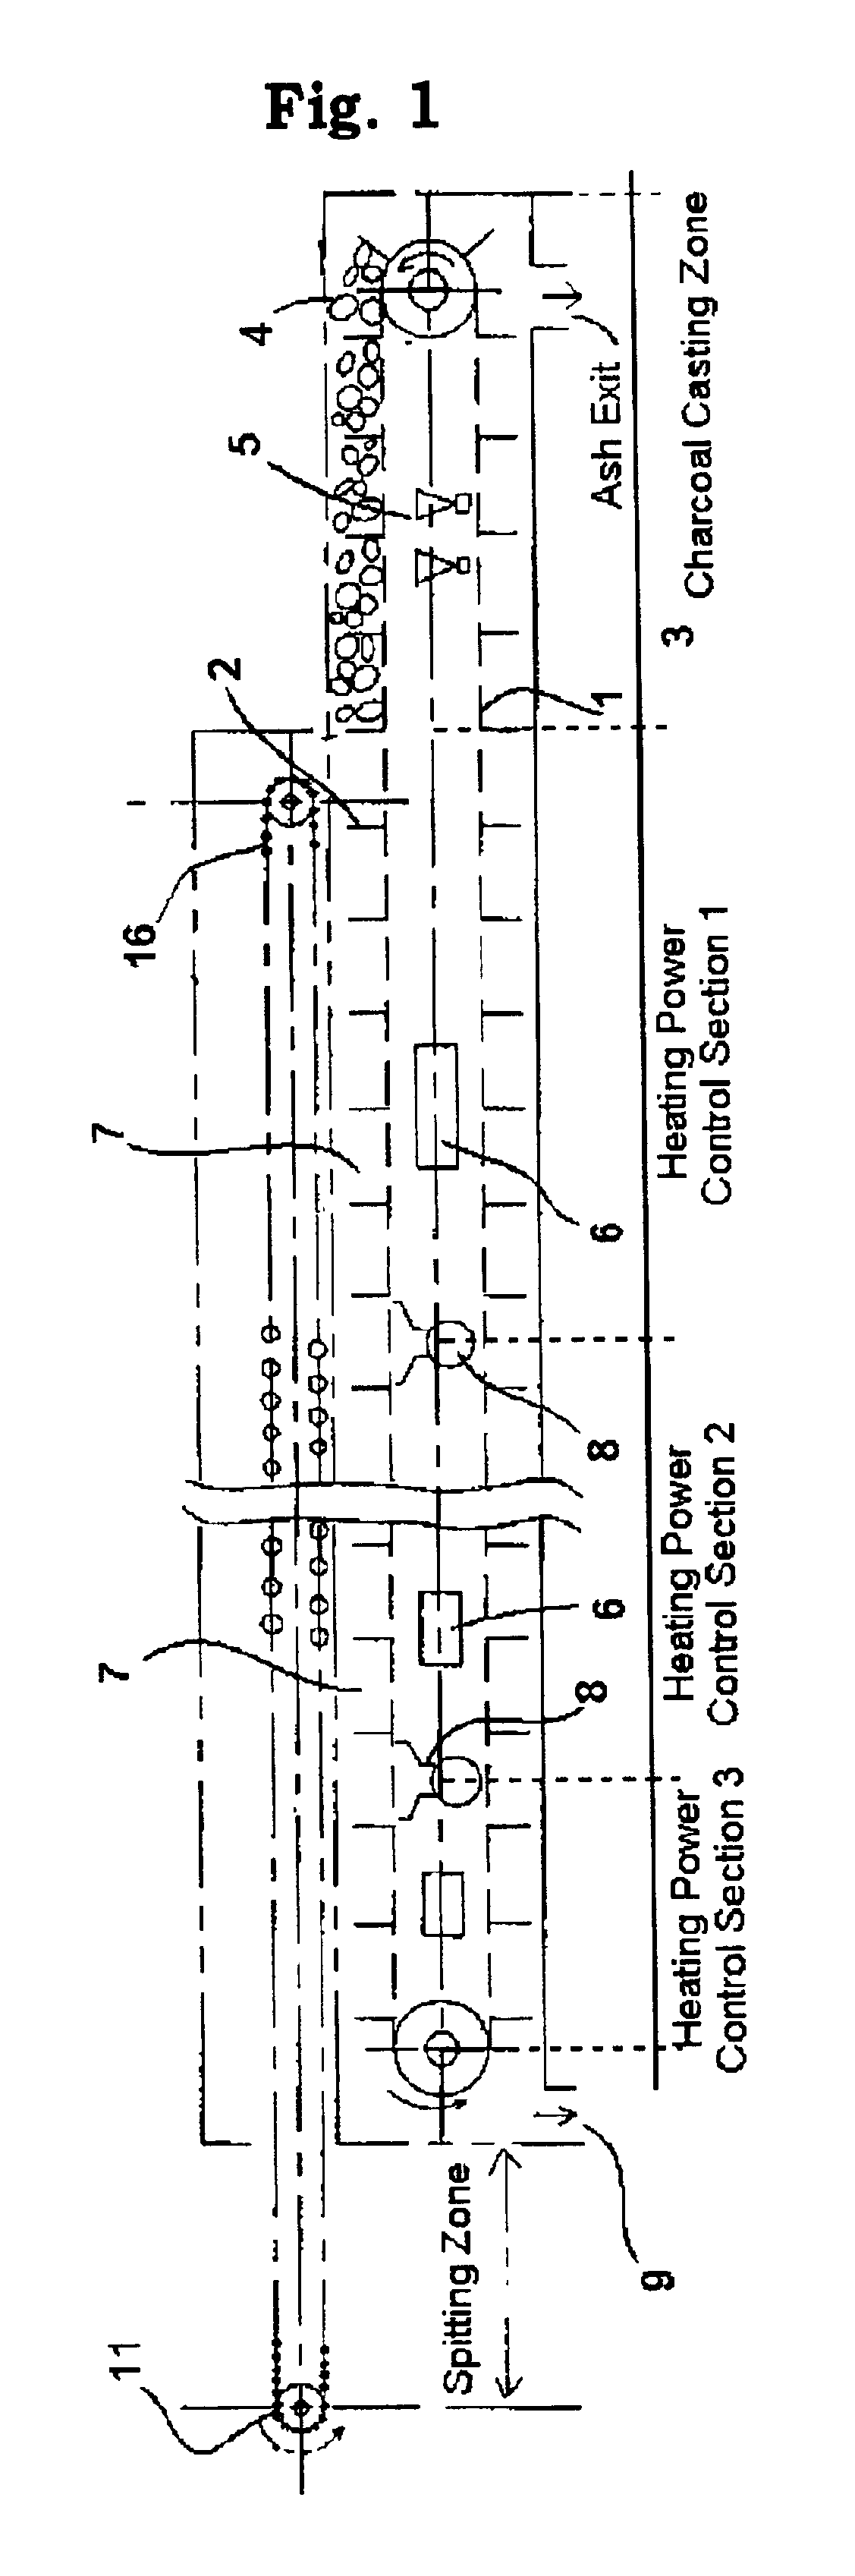 Method and apparatus for manufacturing charcoal grilled foods